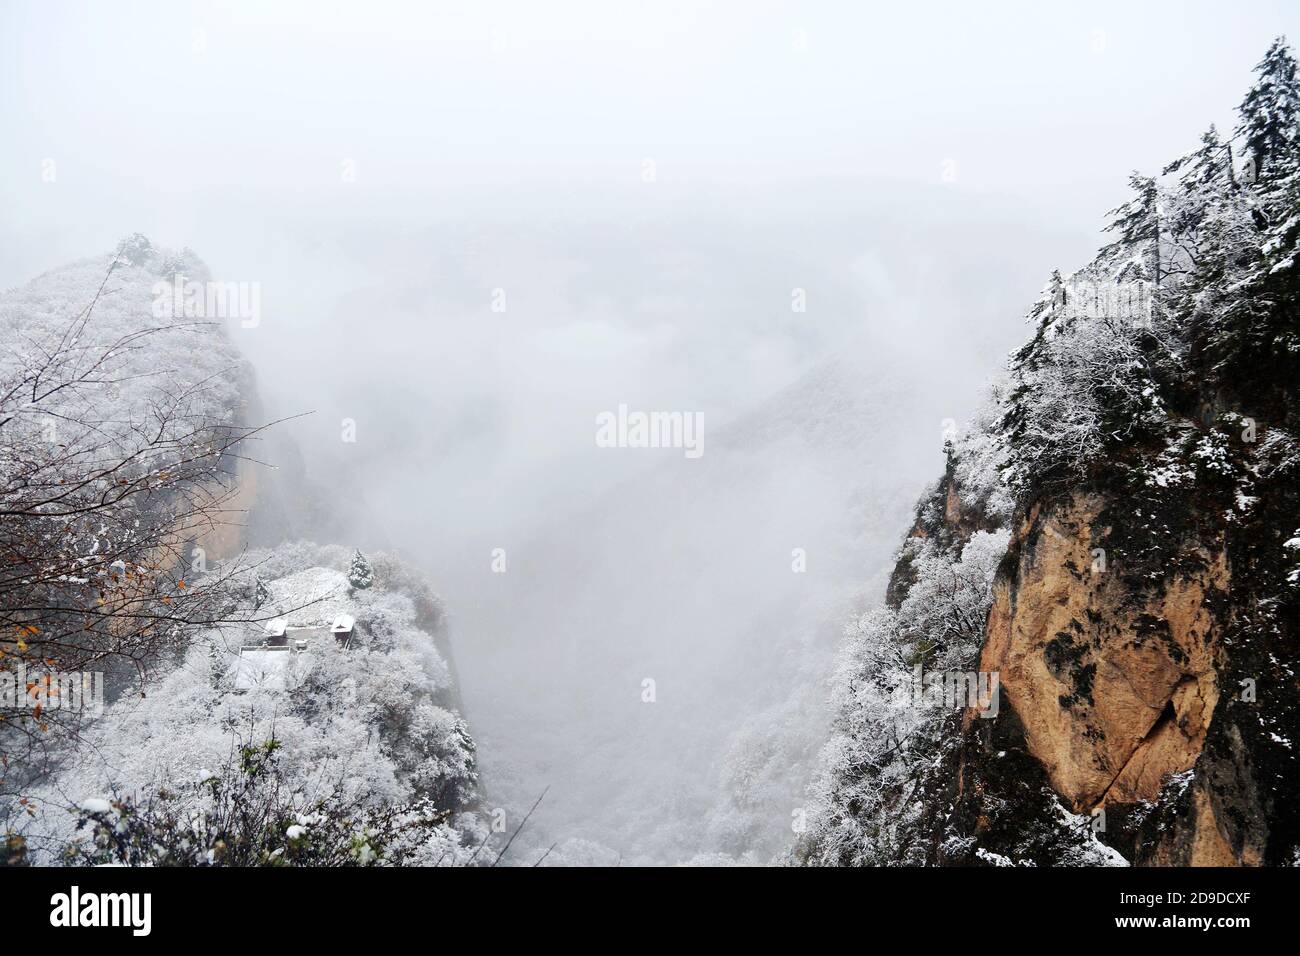 The first snow scenery of Kongtong mountain in Pingliang city, northwest China's Gansu province, 27 October 2020. *** Local Caption *** fachaoshi Stock Photo